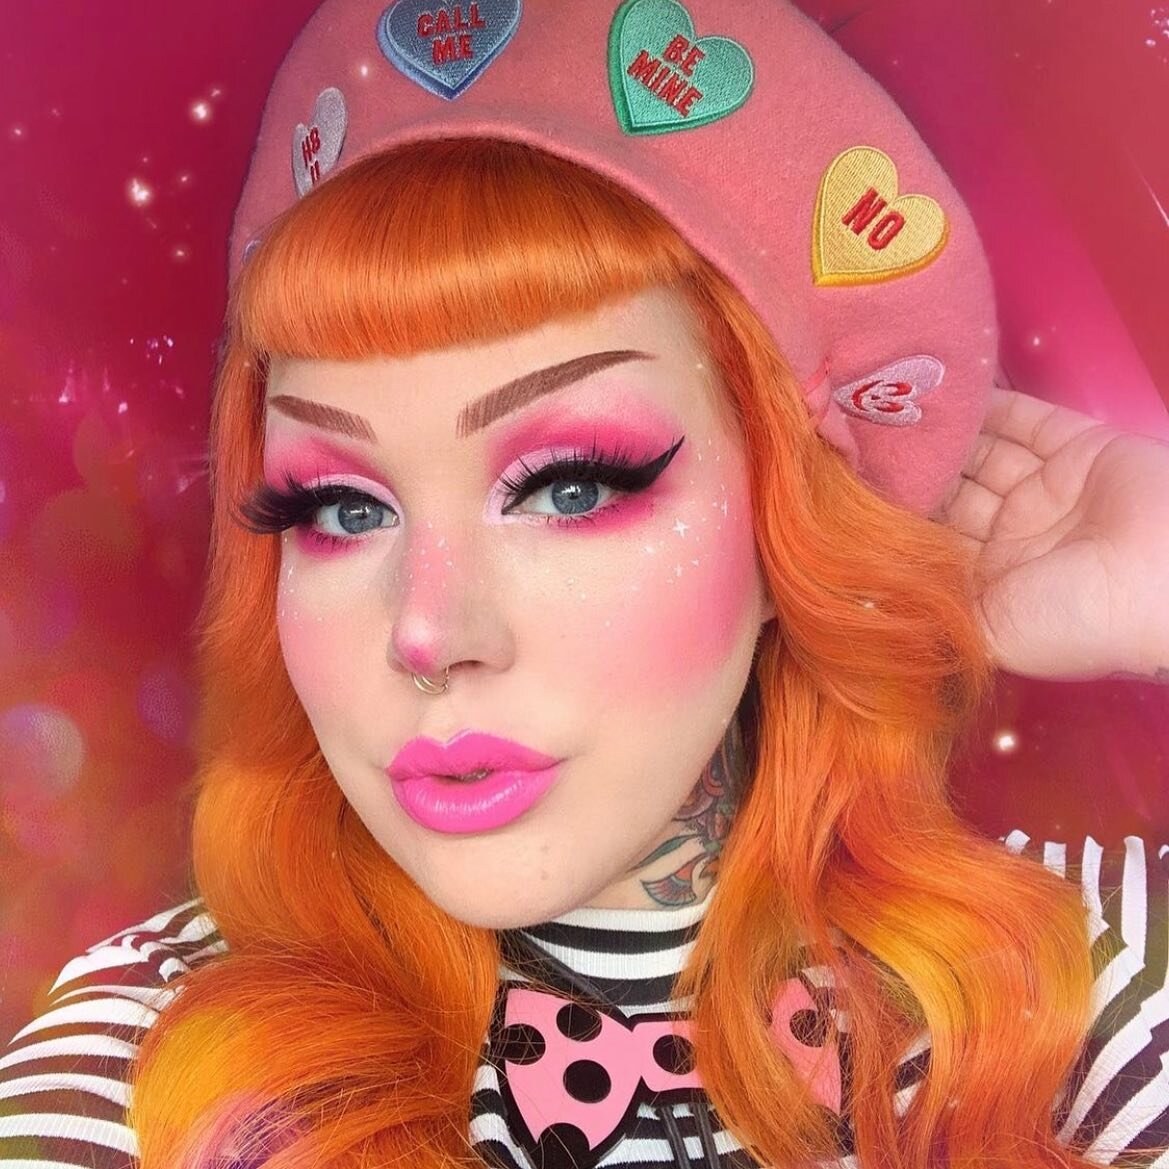 The Glamour Witch strikes again - giving us STUNNING looks for dayz 💖🤩💖🤩💖🤩💖